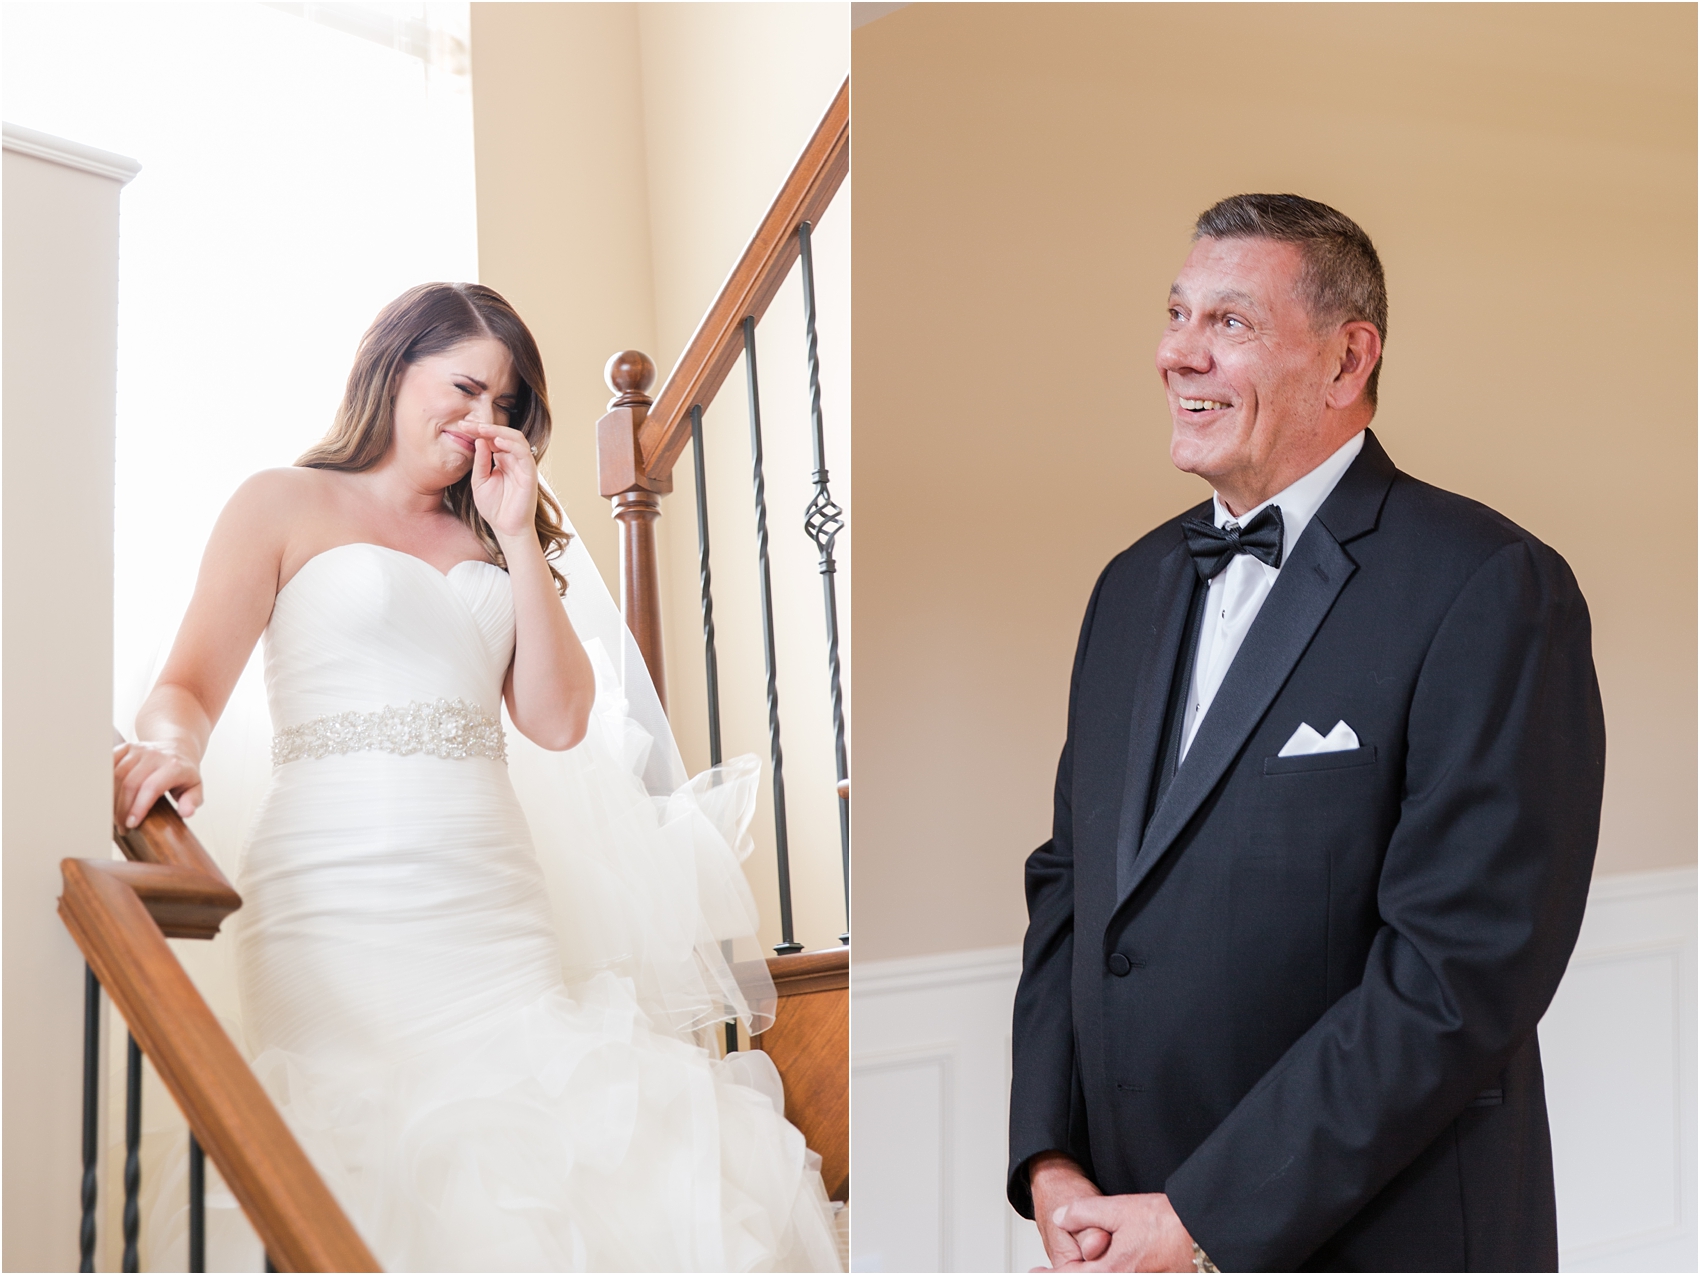 father-and-bride-share-emotional-first-look-on-wedding-day-photos-in-detroit-michigan-by-courtney-carolyn-photography_0012.jpg